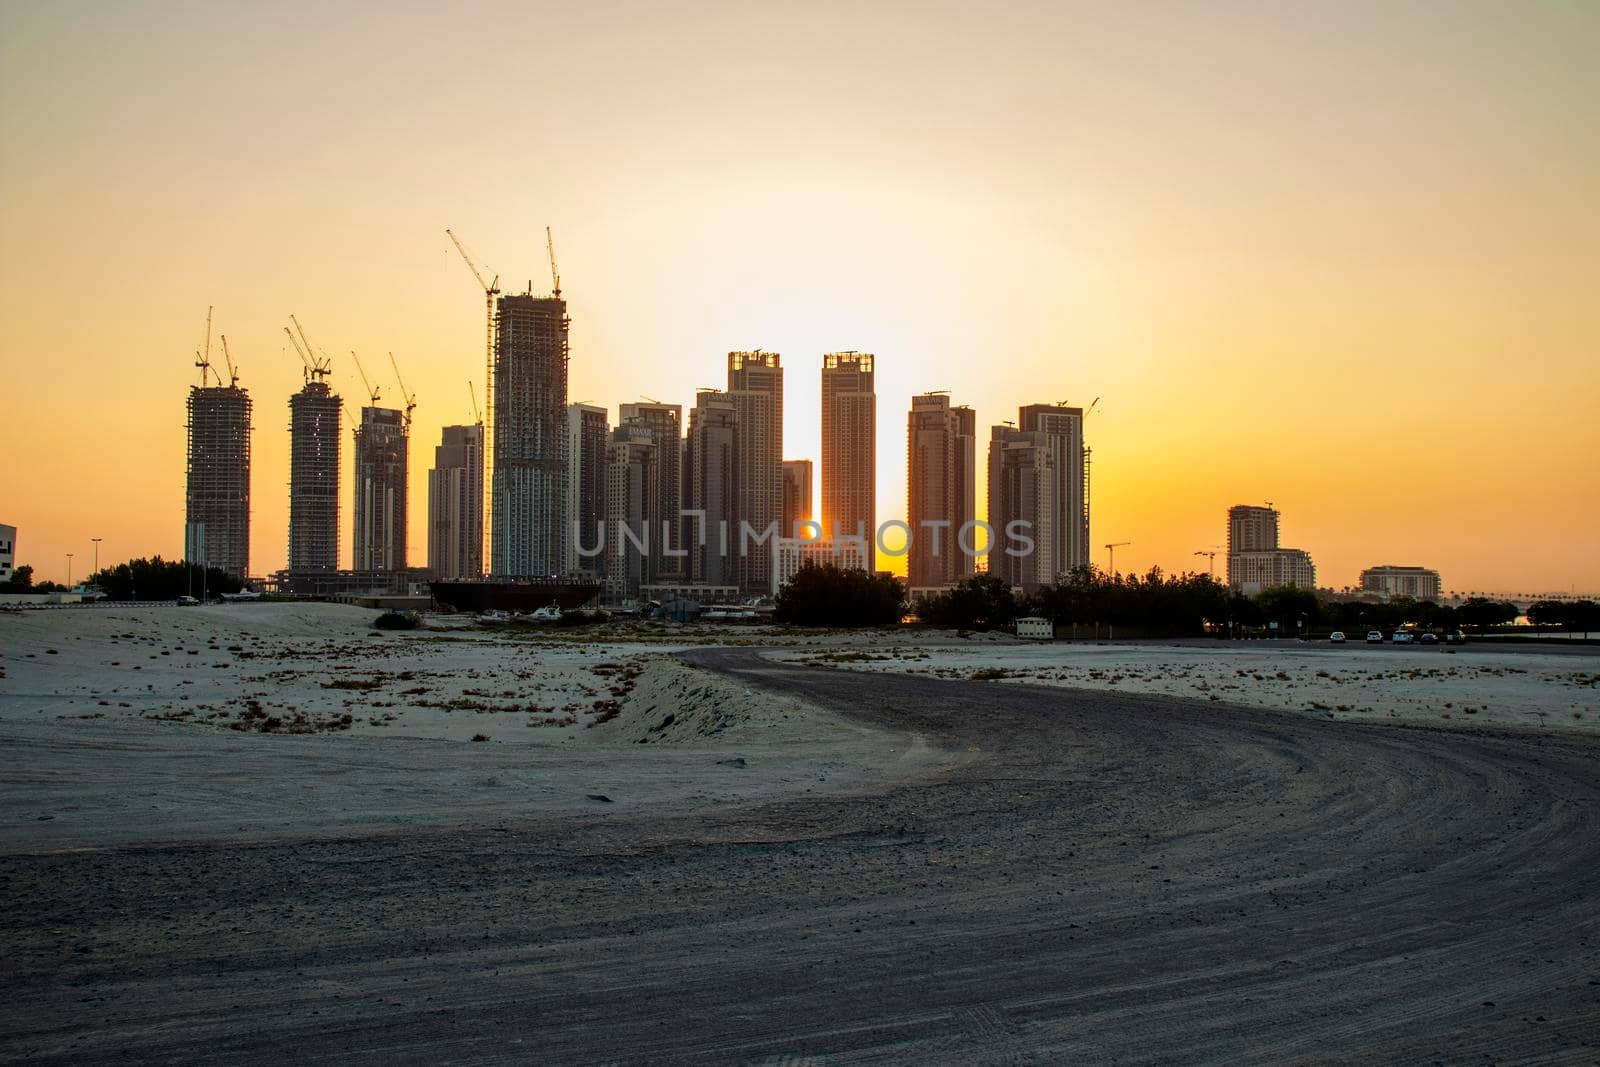 Sunrise in Jadaf area of Dubai, view of Dubai creek Harbor construction of which is partially completed. Outdoors